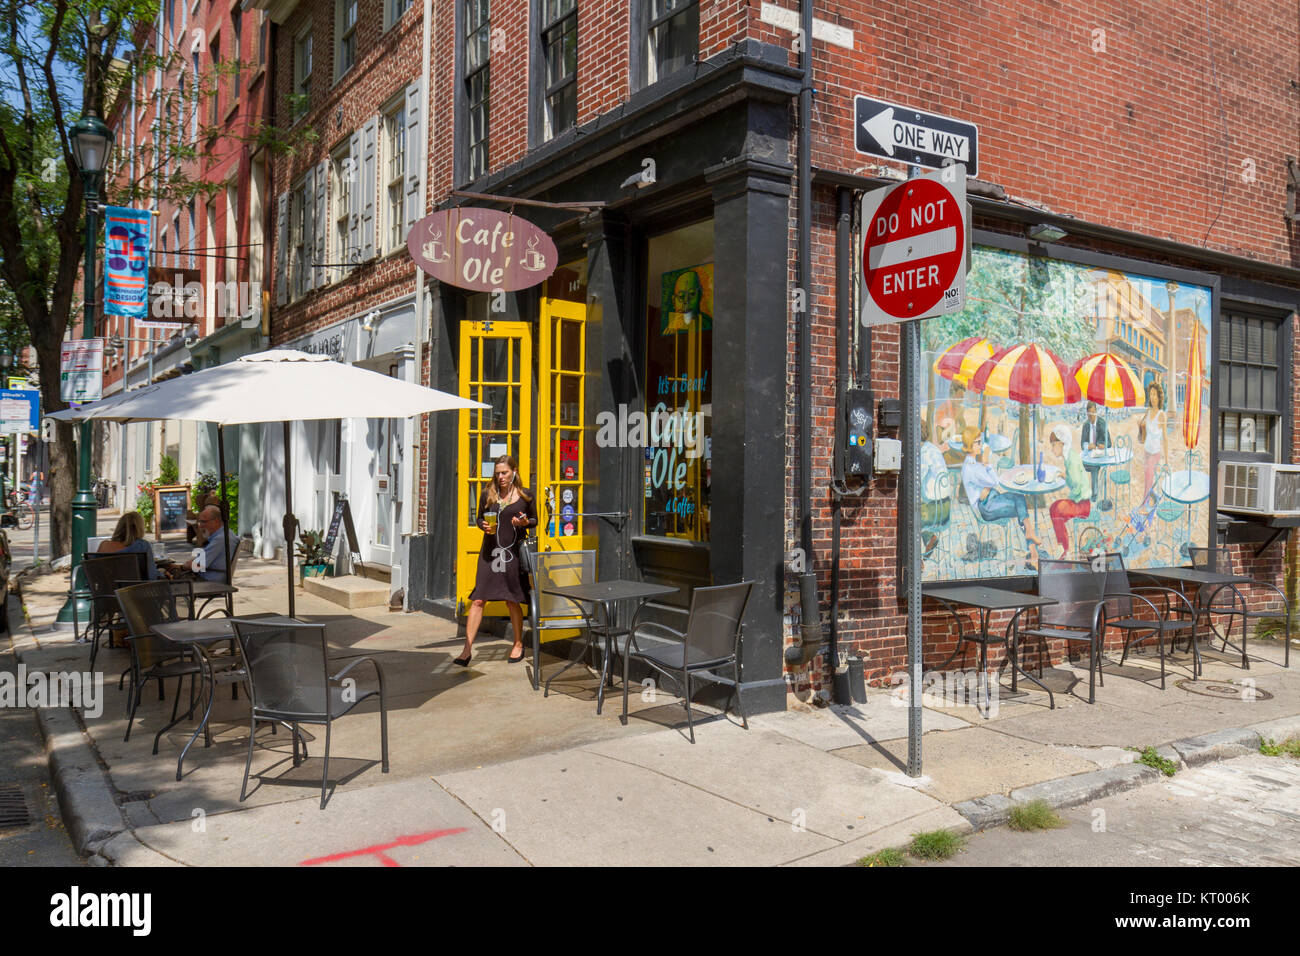 The beautiful external features of the Cafe Ole restaurant, 147 N 3rd St, Philadelphia, Pennsylvania, United States. Stock Photo